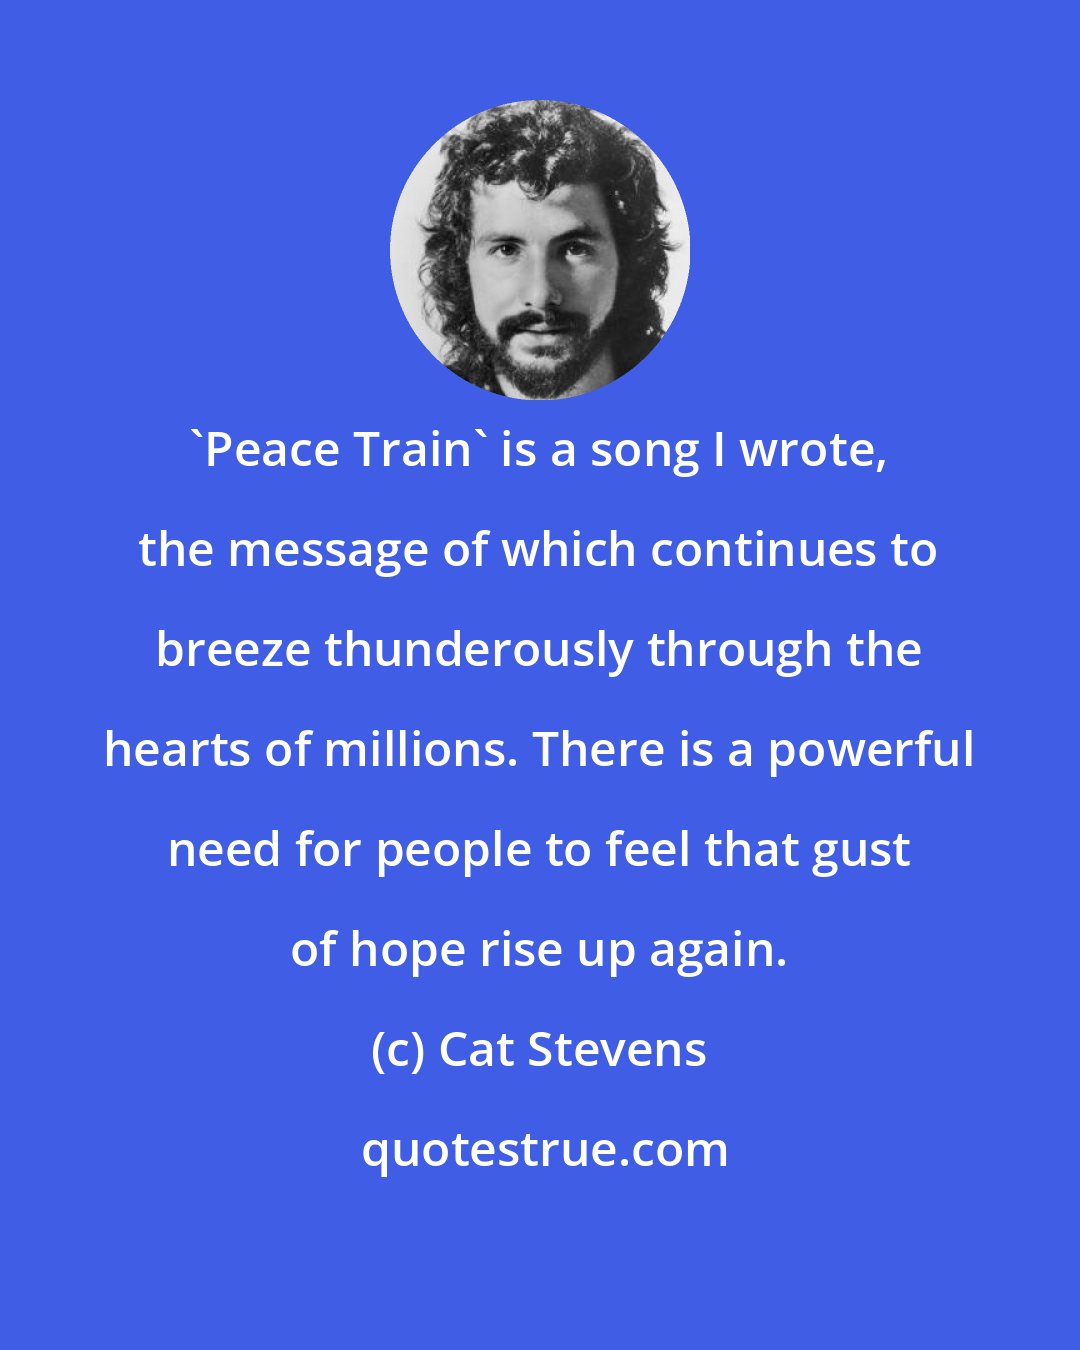 Cat Stevens: 'Peace Train' is a song I wrote, the message of which continues to breeze thunderously through the hearts of millions. There is a powerful need for people to feel that gust of hope rise up again.